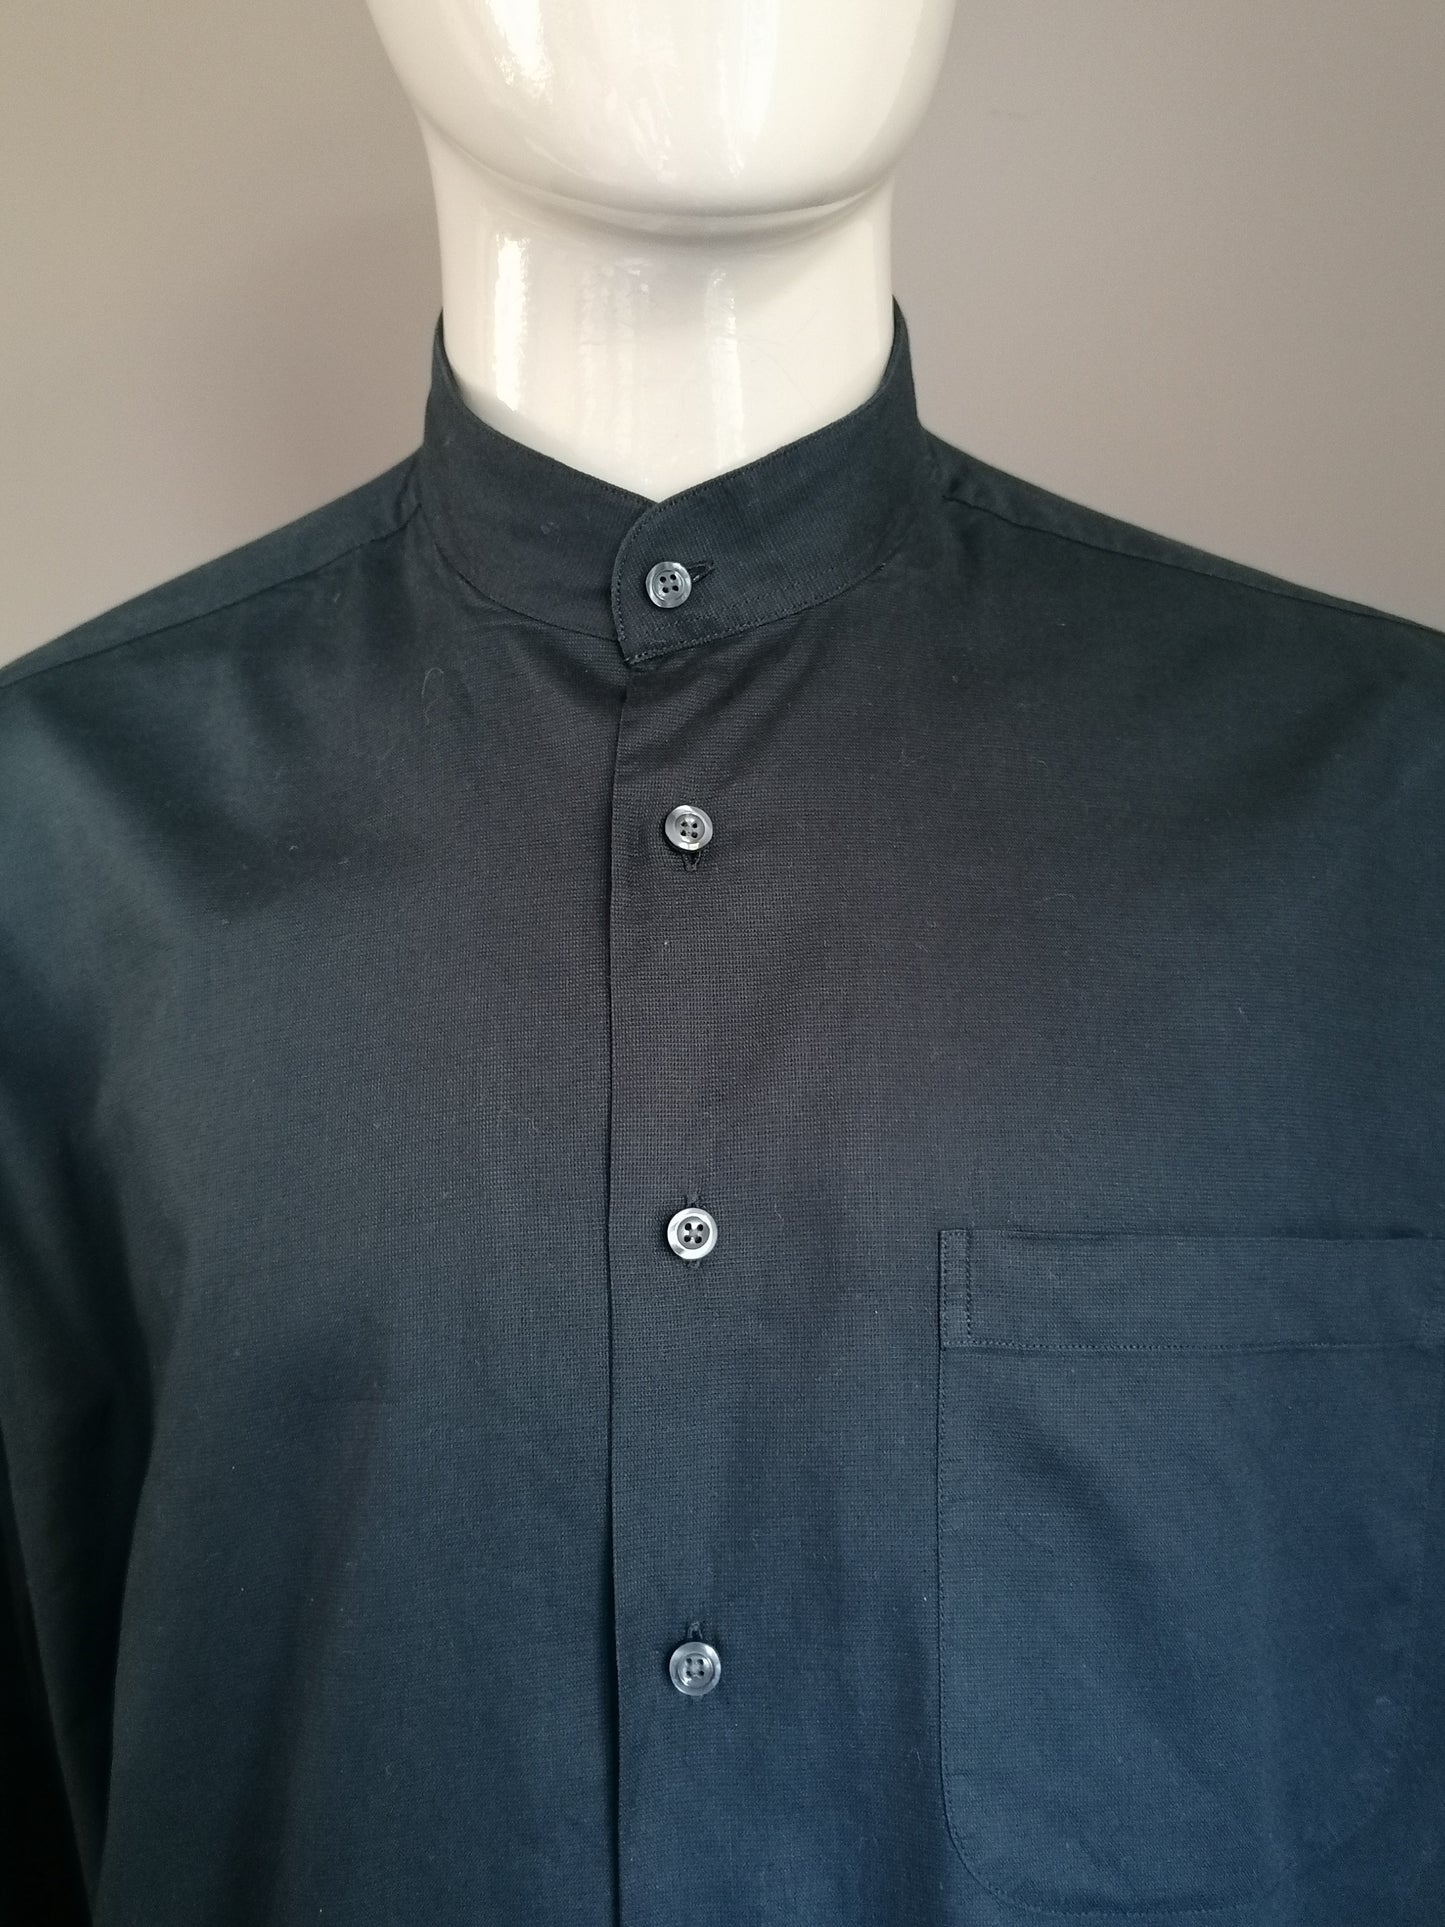 Mcearl shirt with upright / farmers / mao collar .. black colored. Size XL - XXL / 2XL.